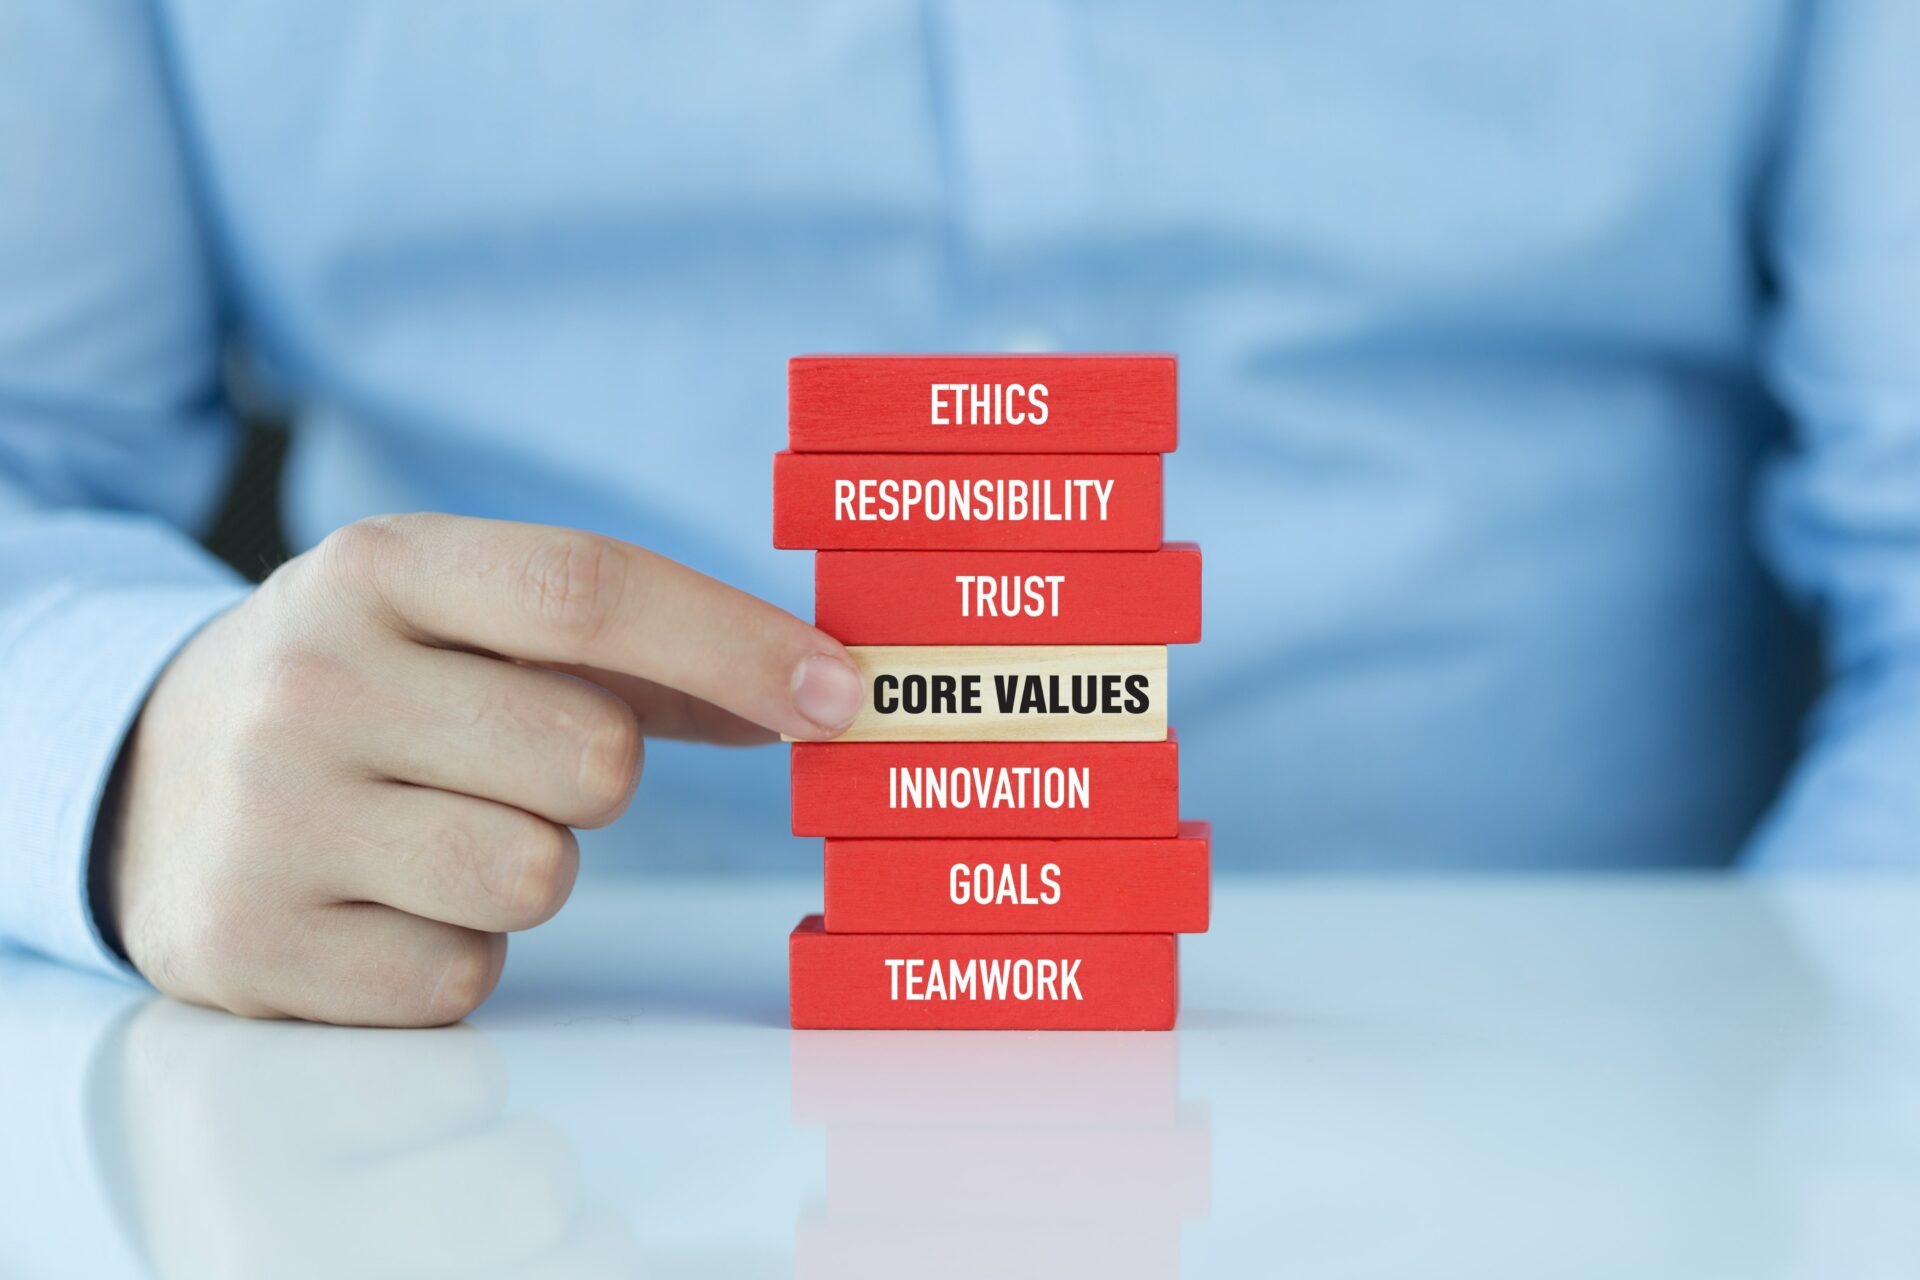 Company Core Values Concept for for attracting and retaining talented employees